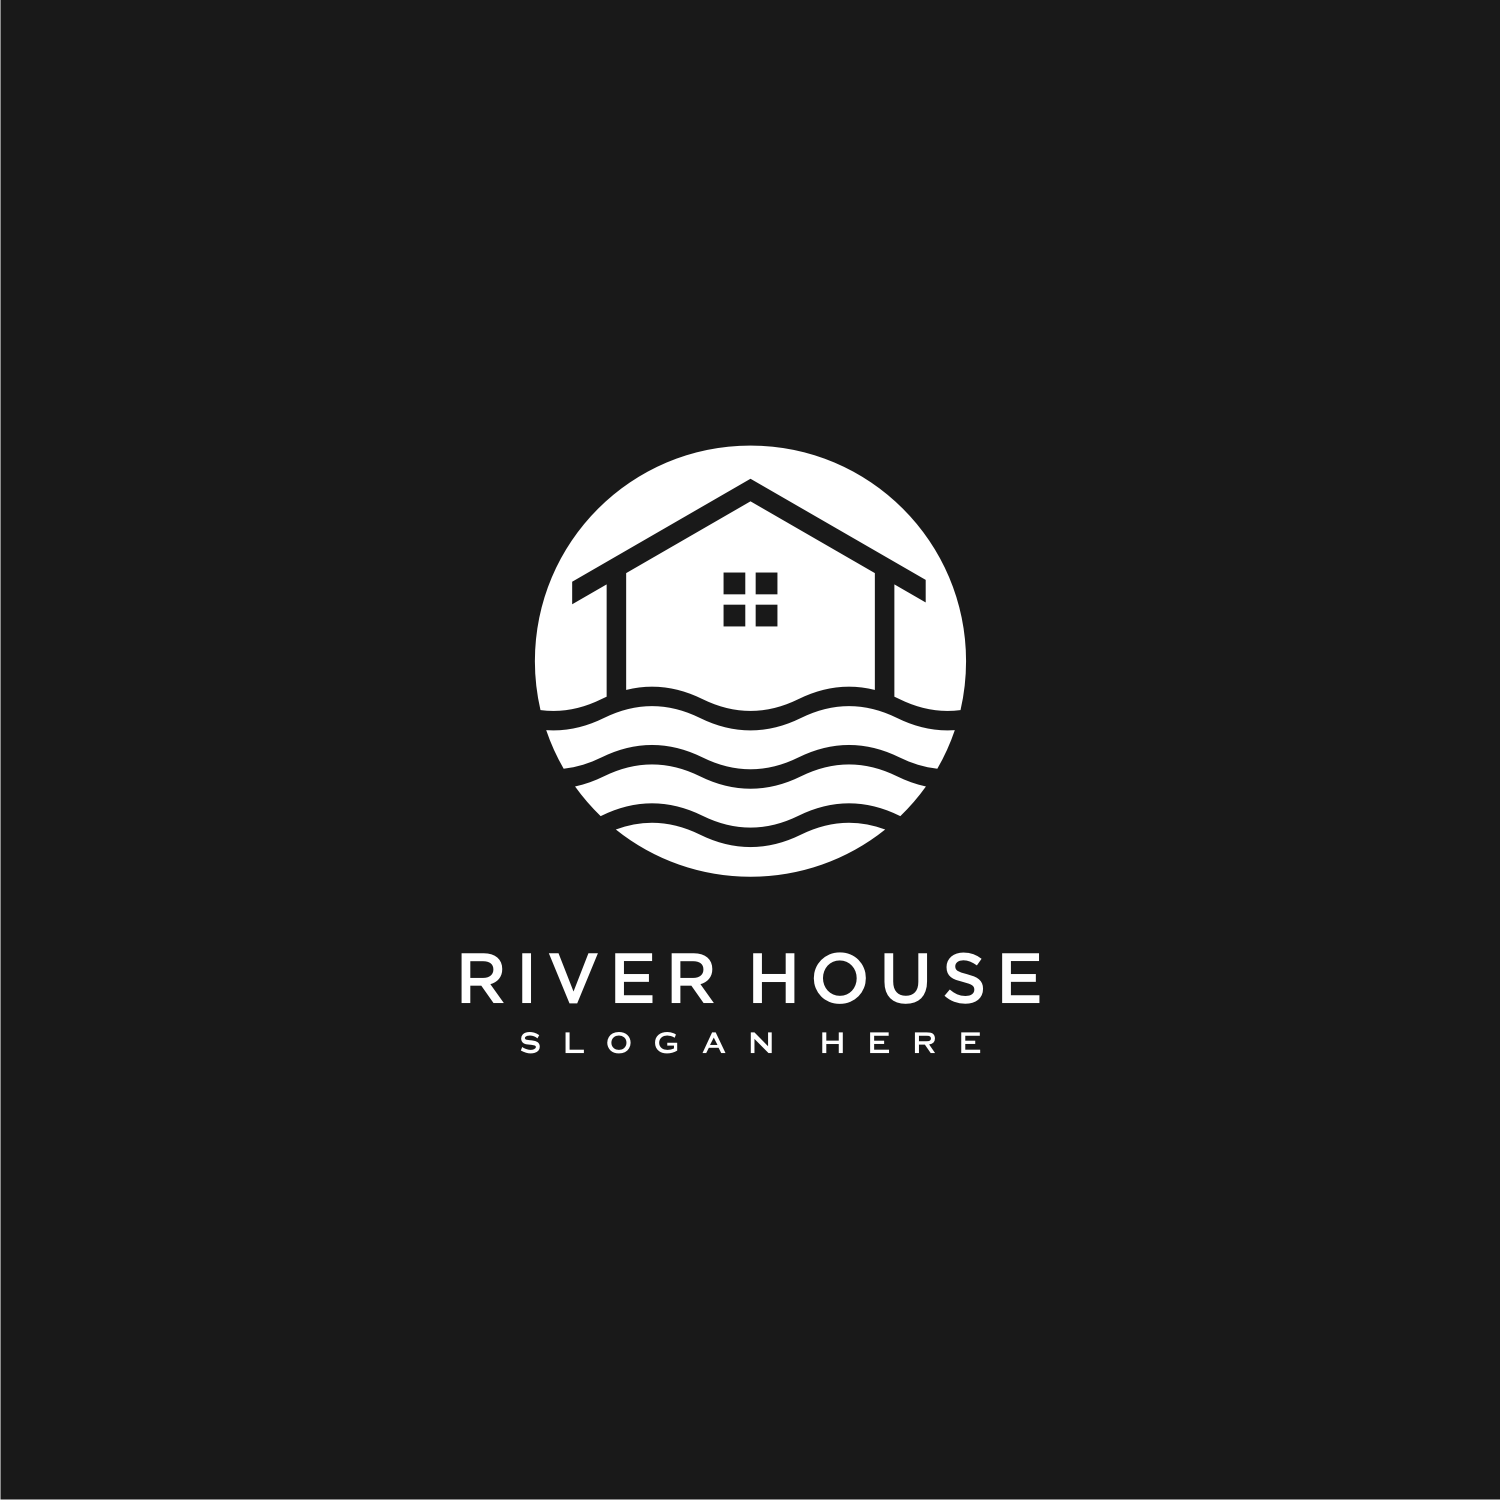 Set Of Minimalist Line Abstract House With River Logo Design .